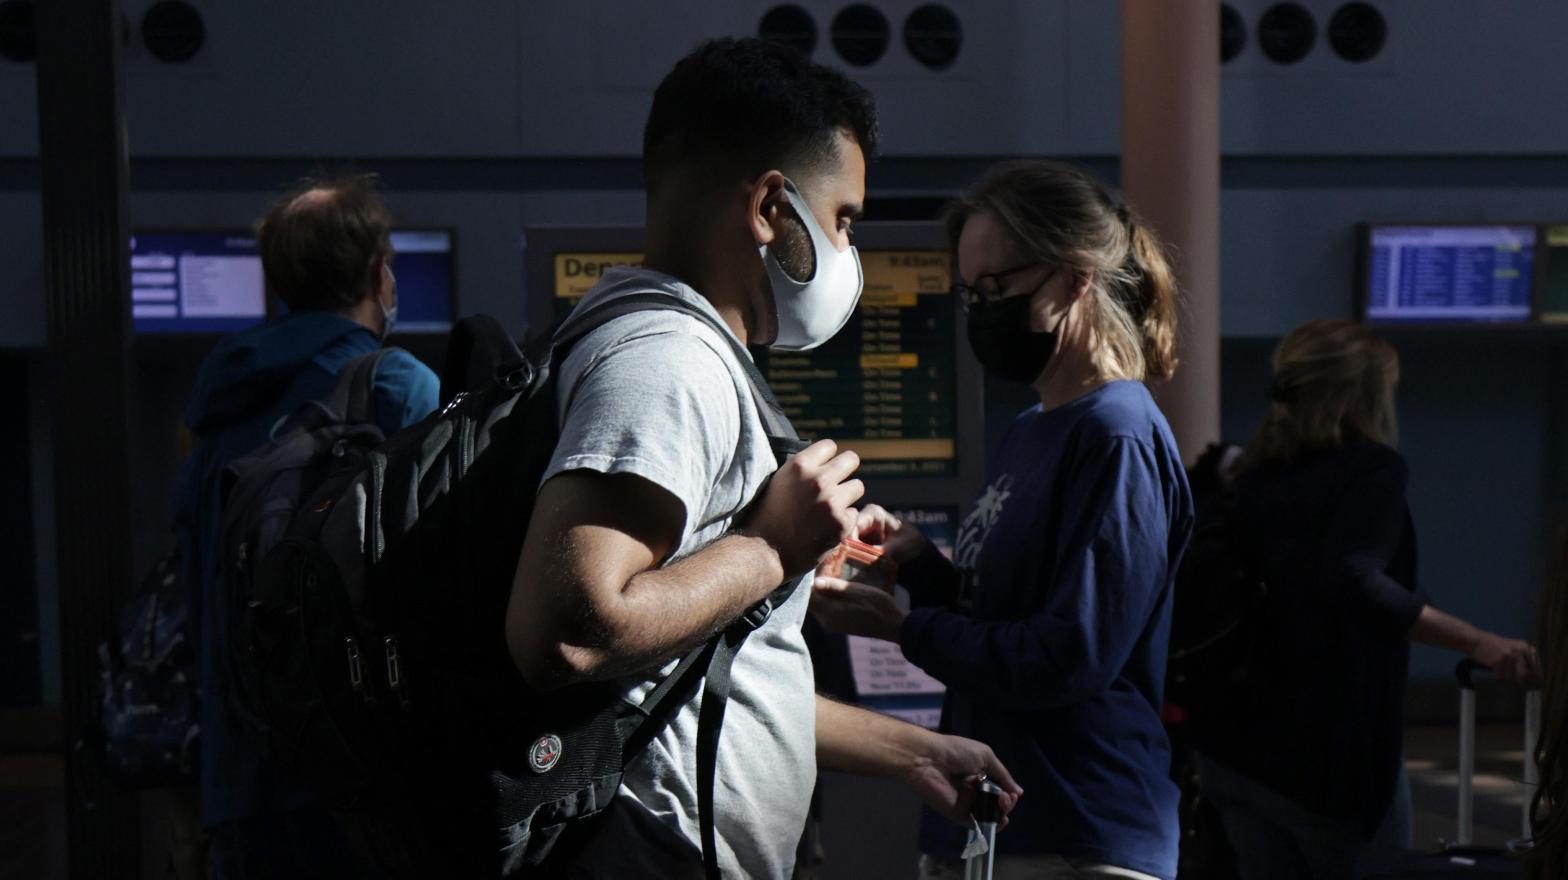 The CDC wanted to track the activity of people's movement. (Image: Alex Wong, Getty Images)